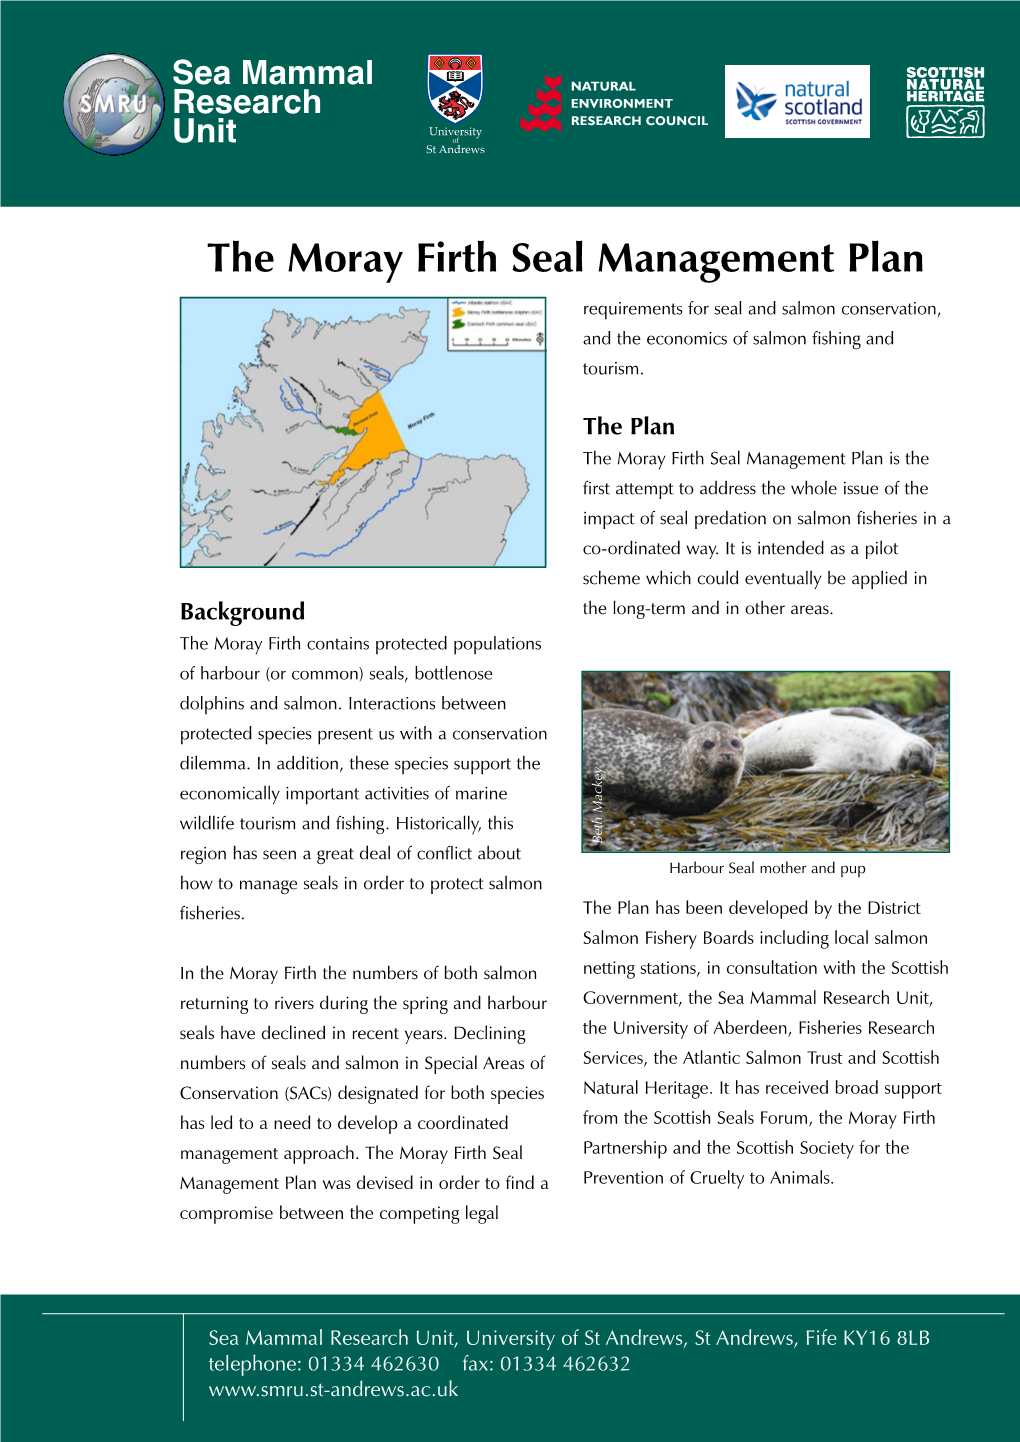 The Moray Firth Seal Management Plan